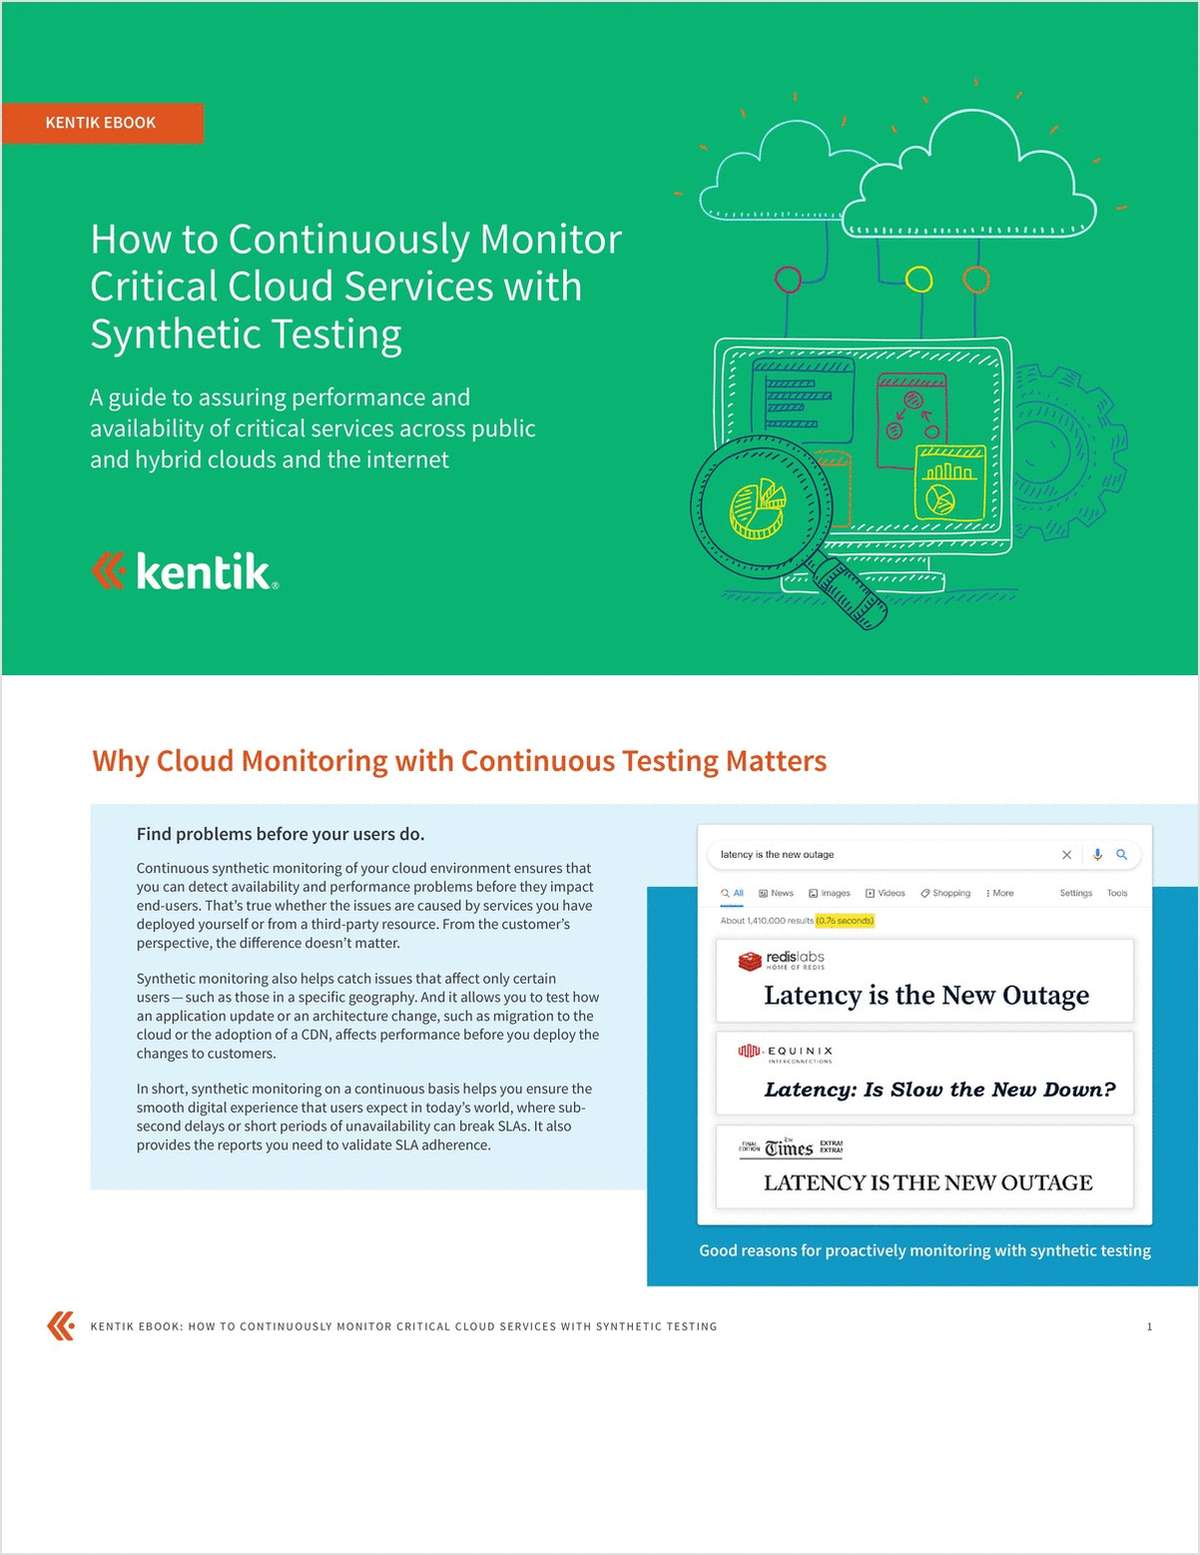 How to Continuously Monitor Critical Cloud Services with Synthetic Testing